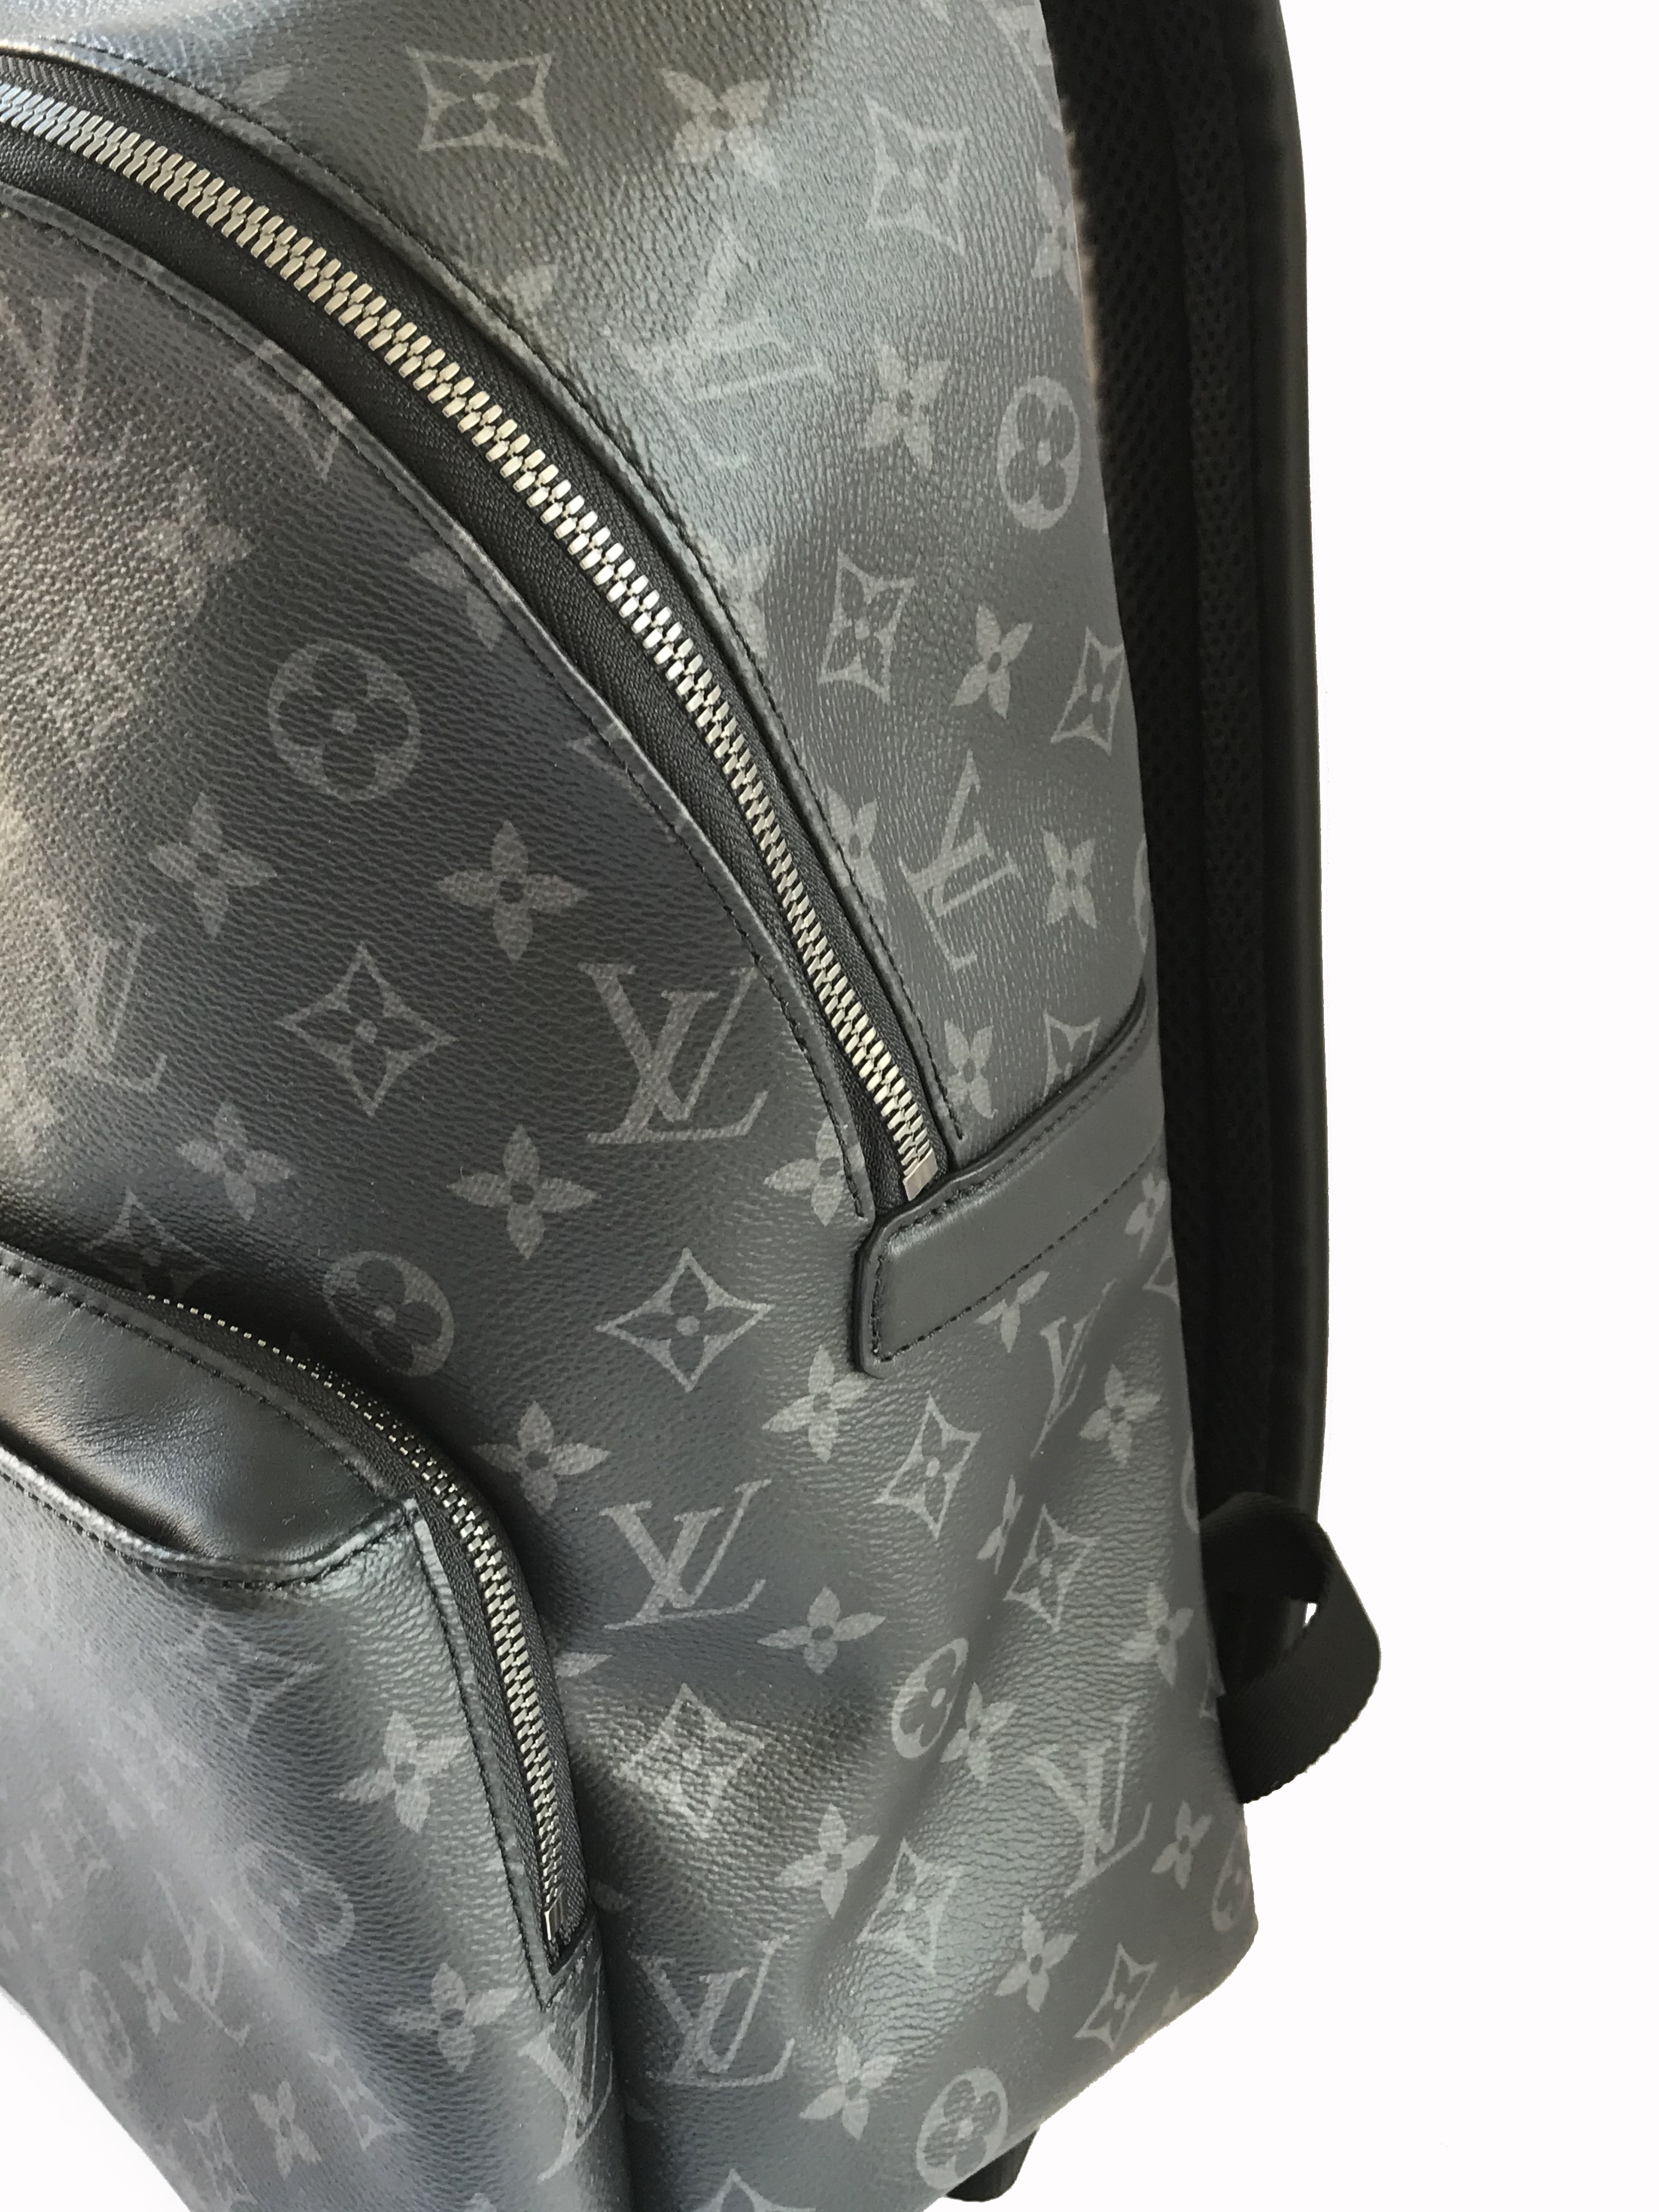 New Louis Vuitton Backpack Apollo Discovery Monogram Eclipse